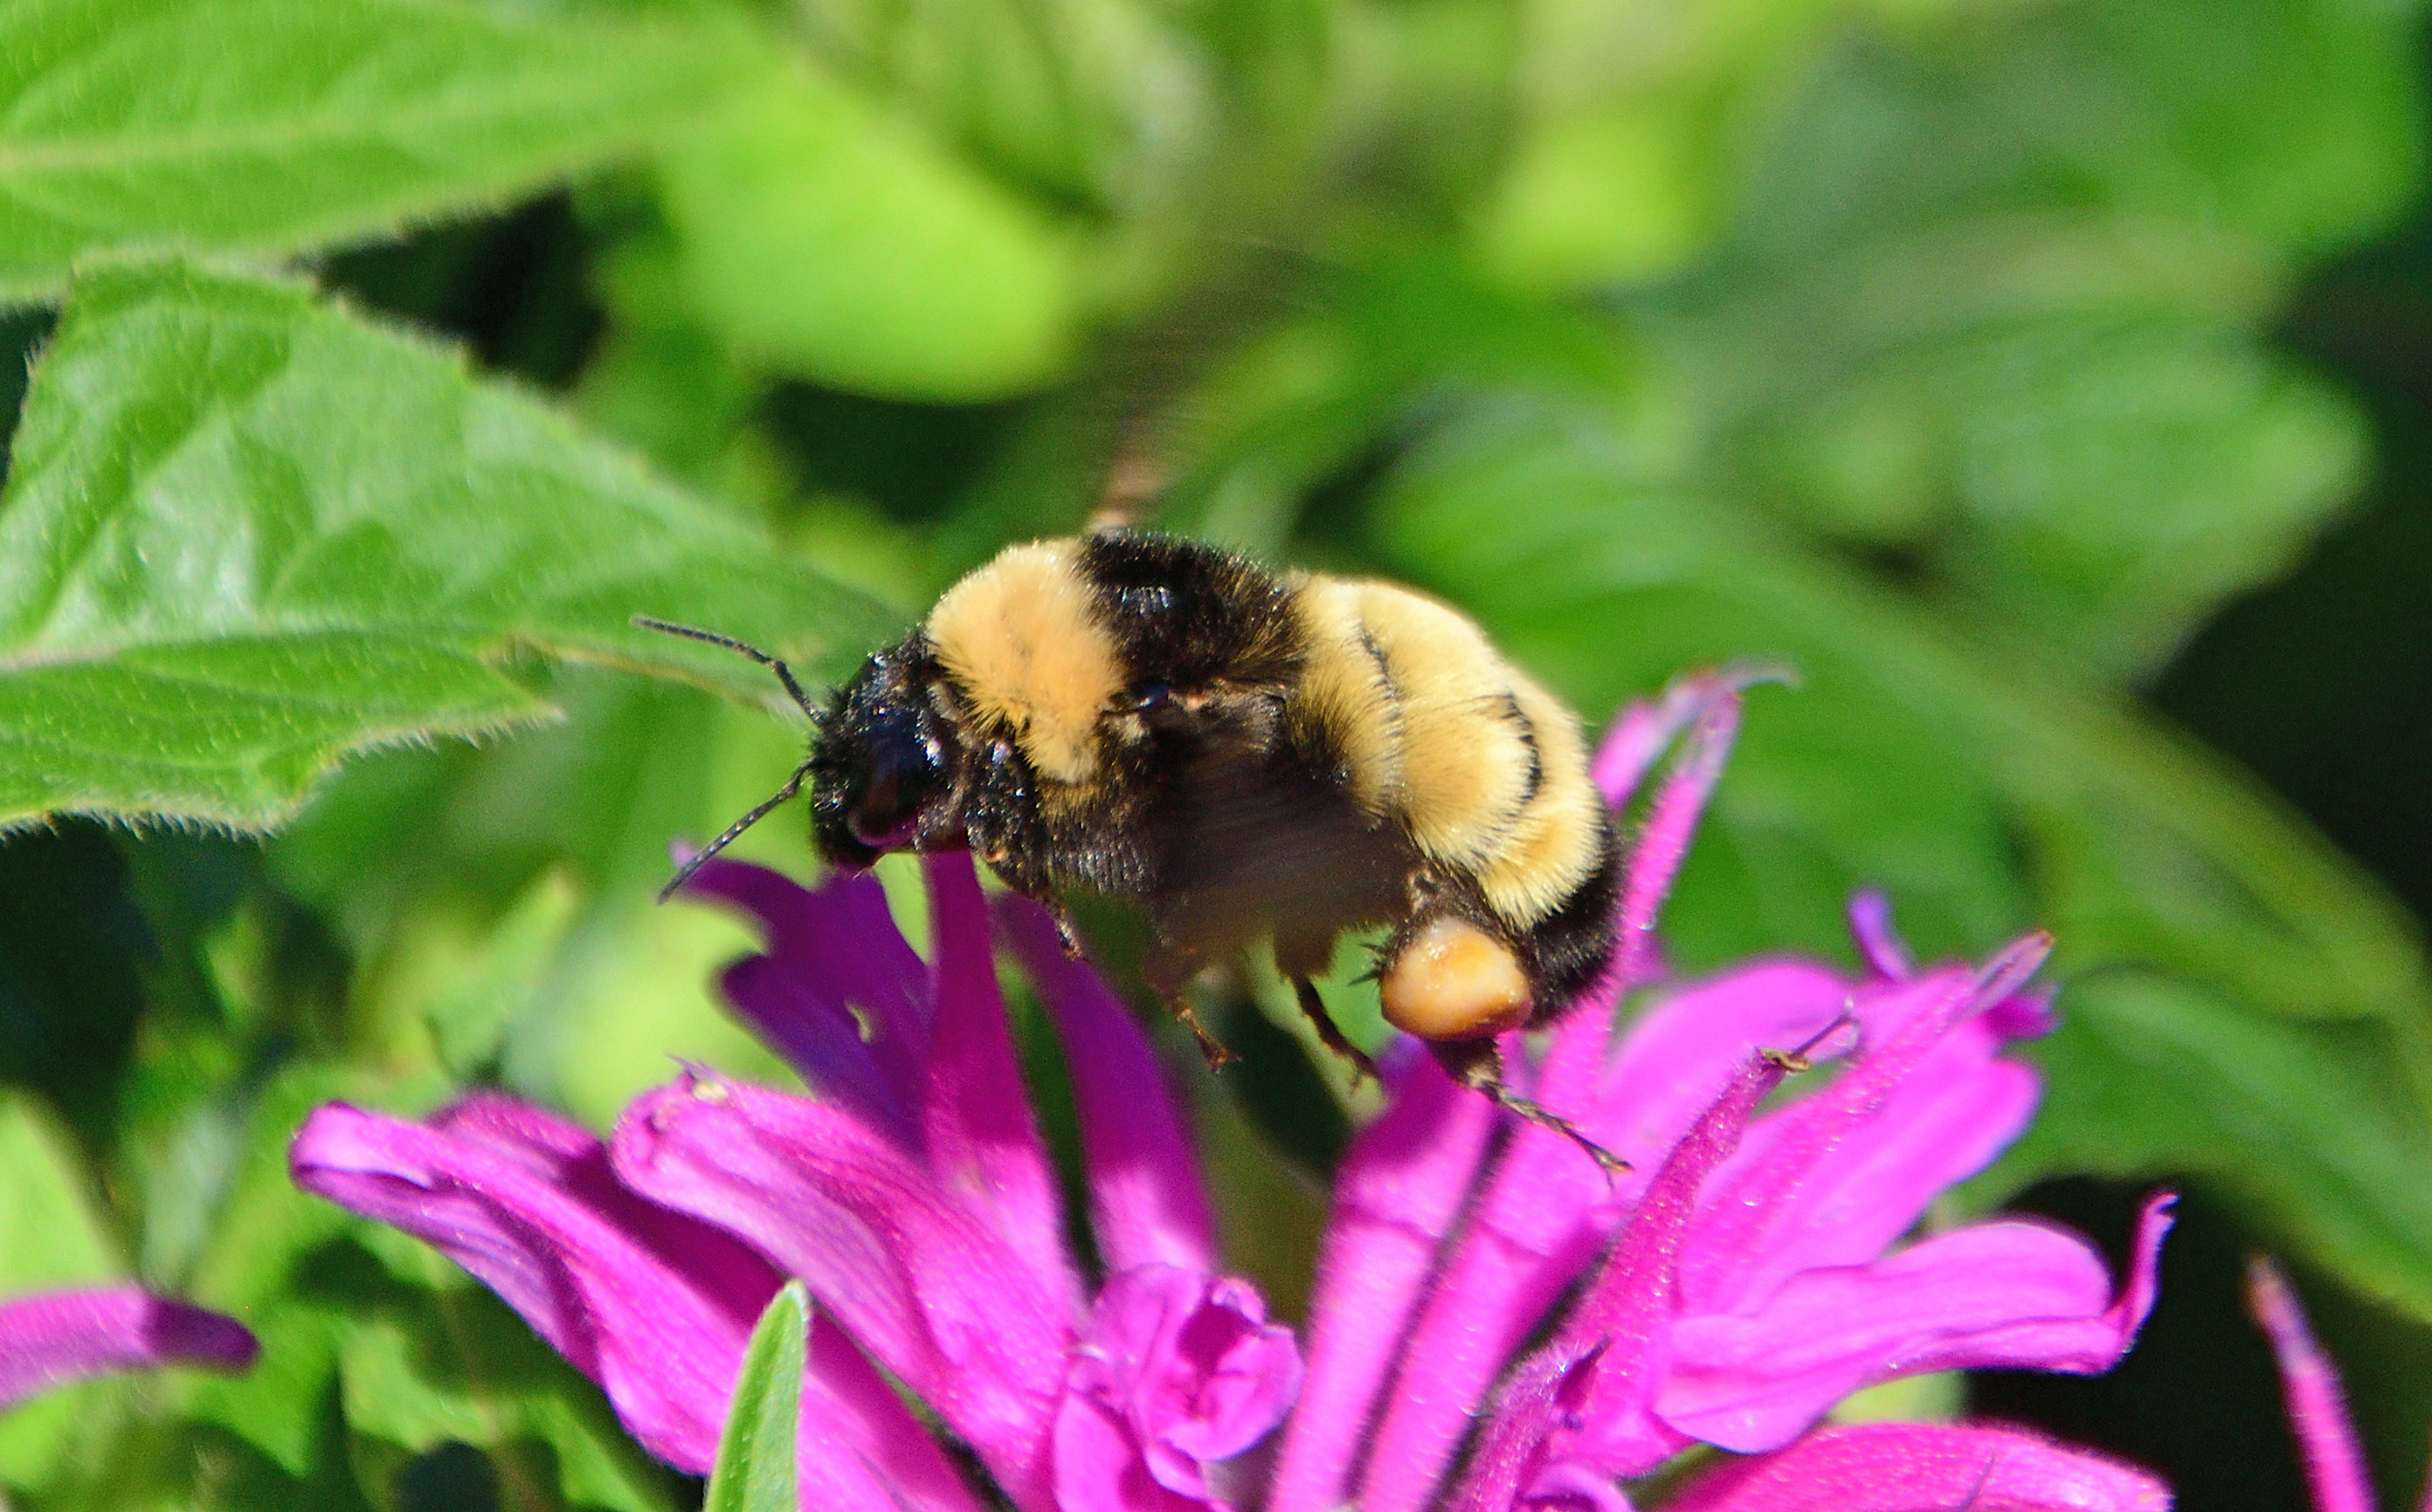 A black and yellow bumble bee on a bright pink flower